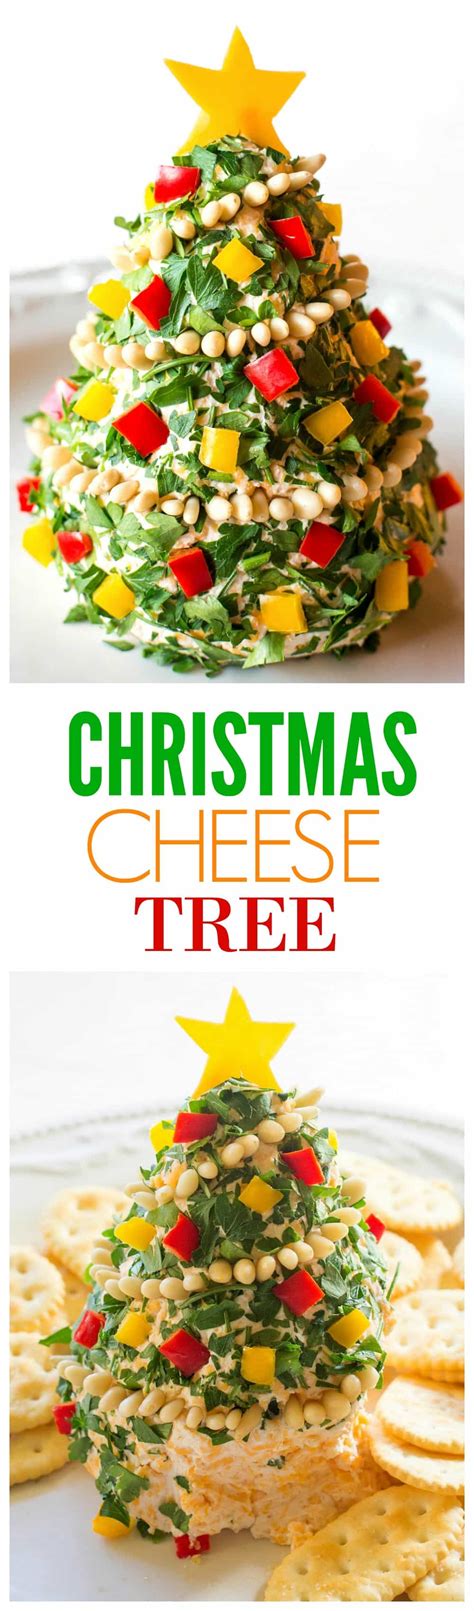 We've dug deep into our treasure filled with sweet and christmas tree puff pastry #christmas #appetizer. Christmas Tree Shaped Appetizer Recipes - Easy Cheesy ...